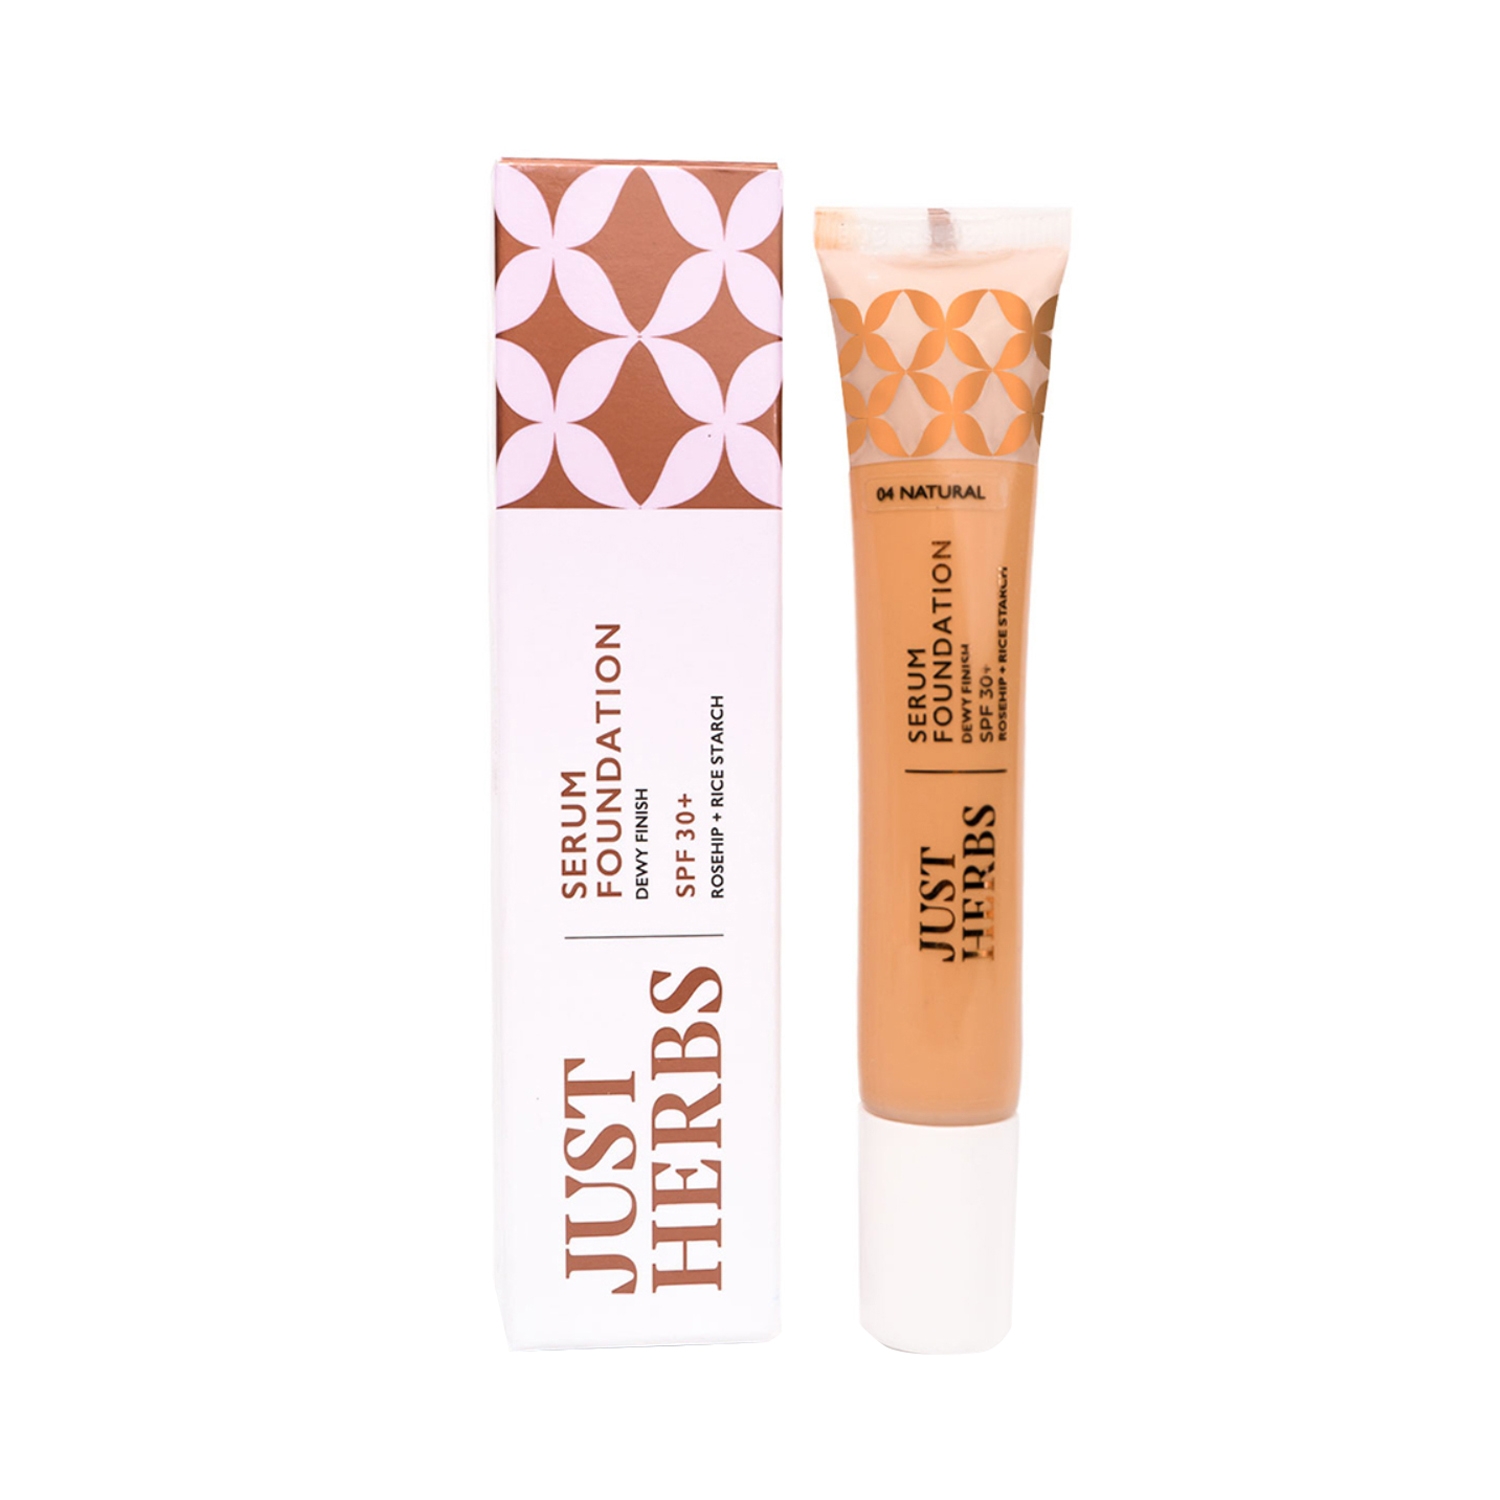 Just Herbs Serum Foundation Dewy Finish SPF 30+ With Rosehip & Rice Starch - 04 Natural (20ml)